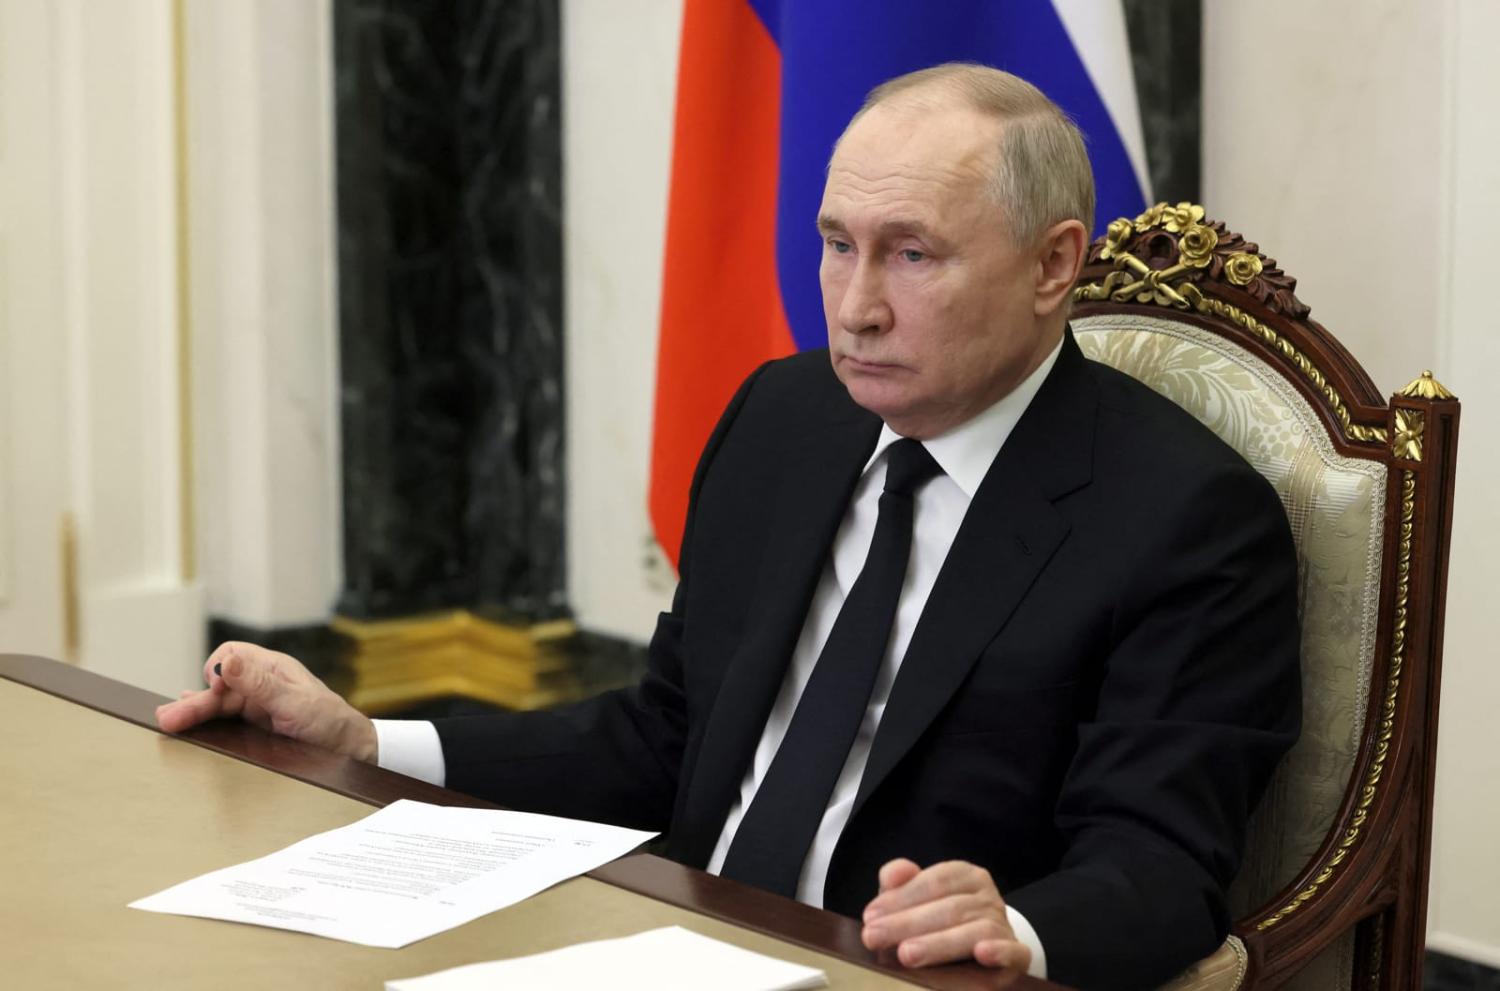 Russian President Vladimir Putin reportedly dismissed US warnings of an impending attack as as “blackmail” and “intimidation” (Mikhail Metzel/AFP via Getty Images)